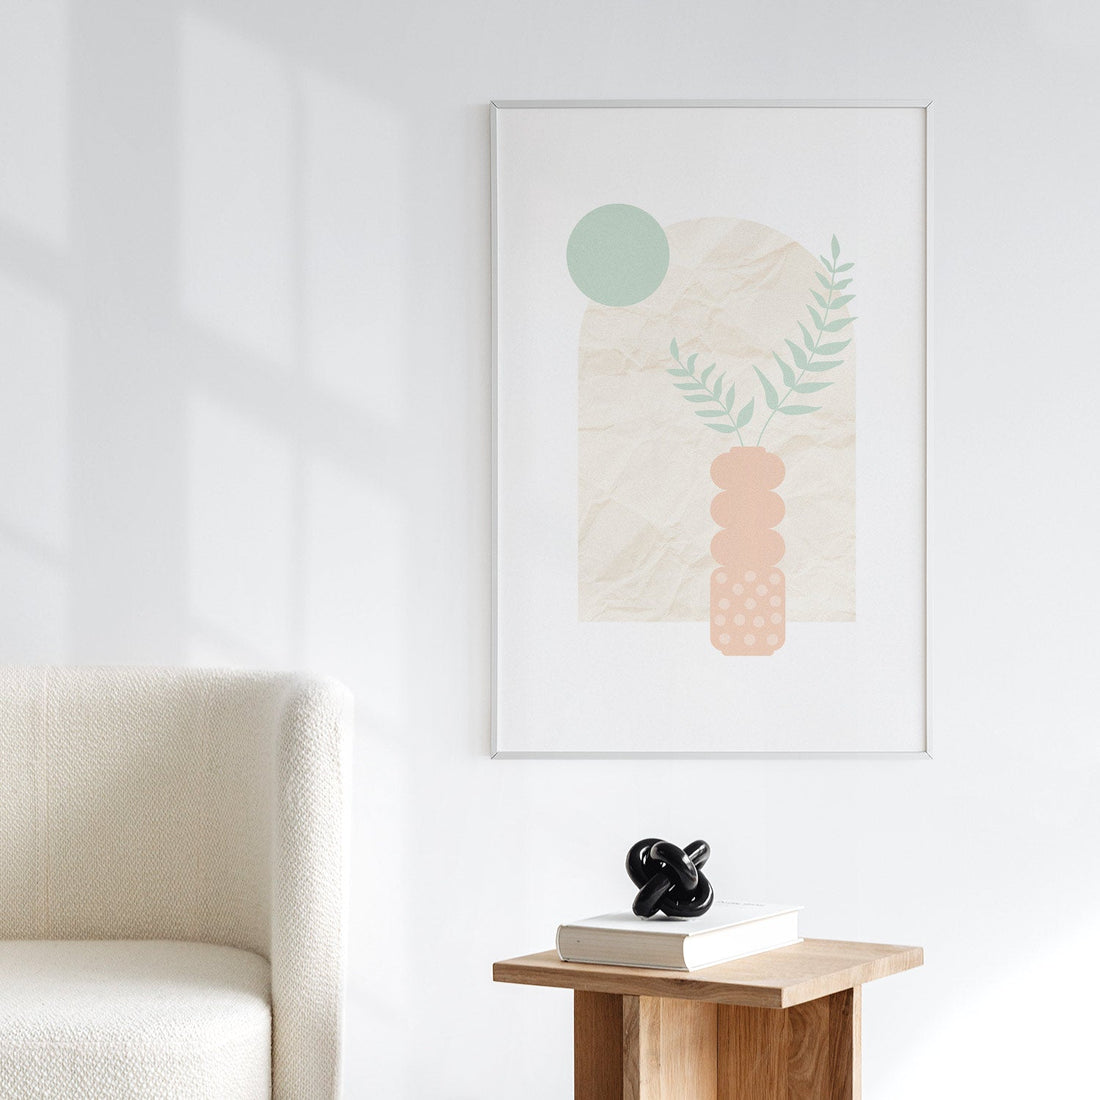 bohemian style art poster in pastel colors